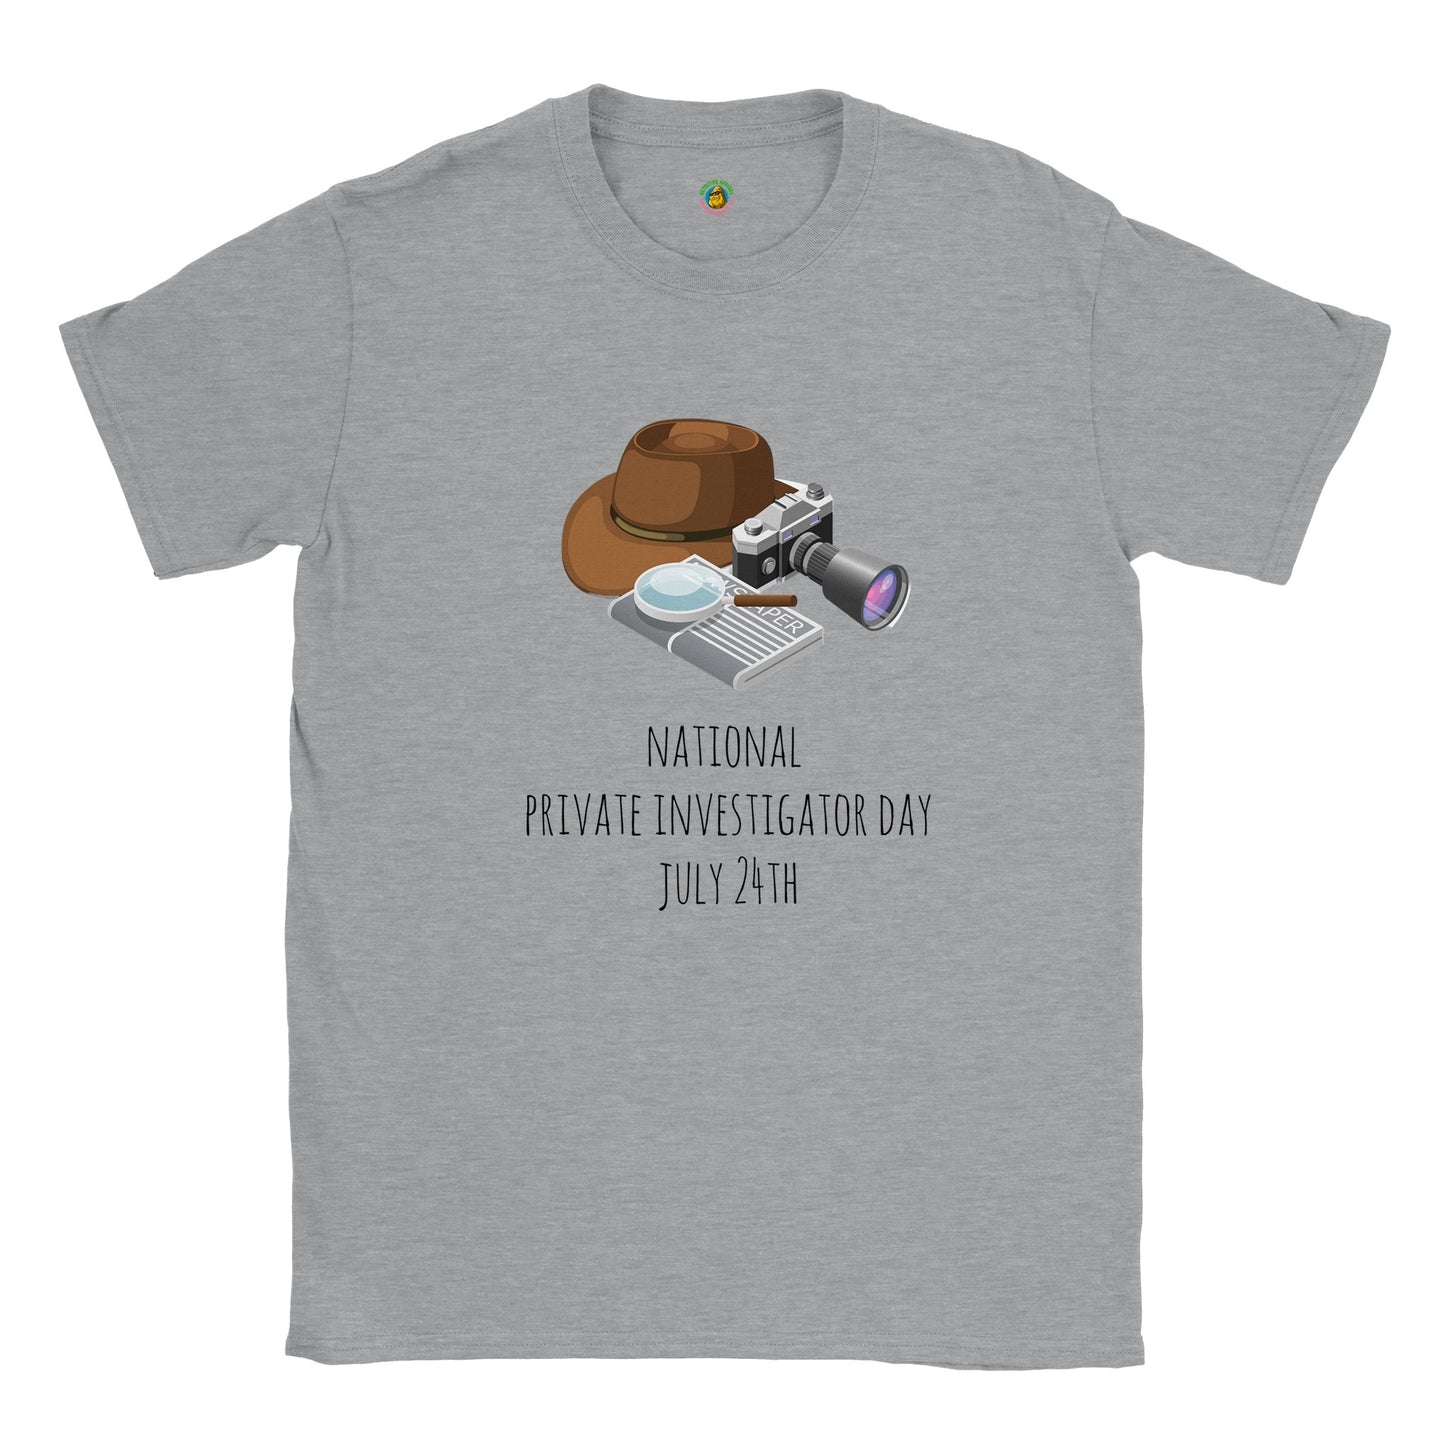 Short-Sleeve Unisex Crewneck T-shirt - Happy National Private Investigator Day July 24th